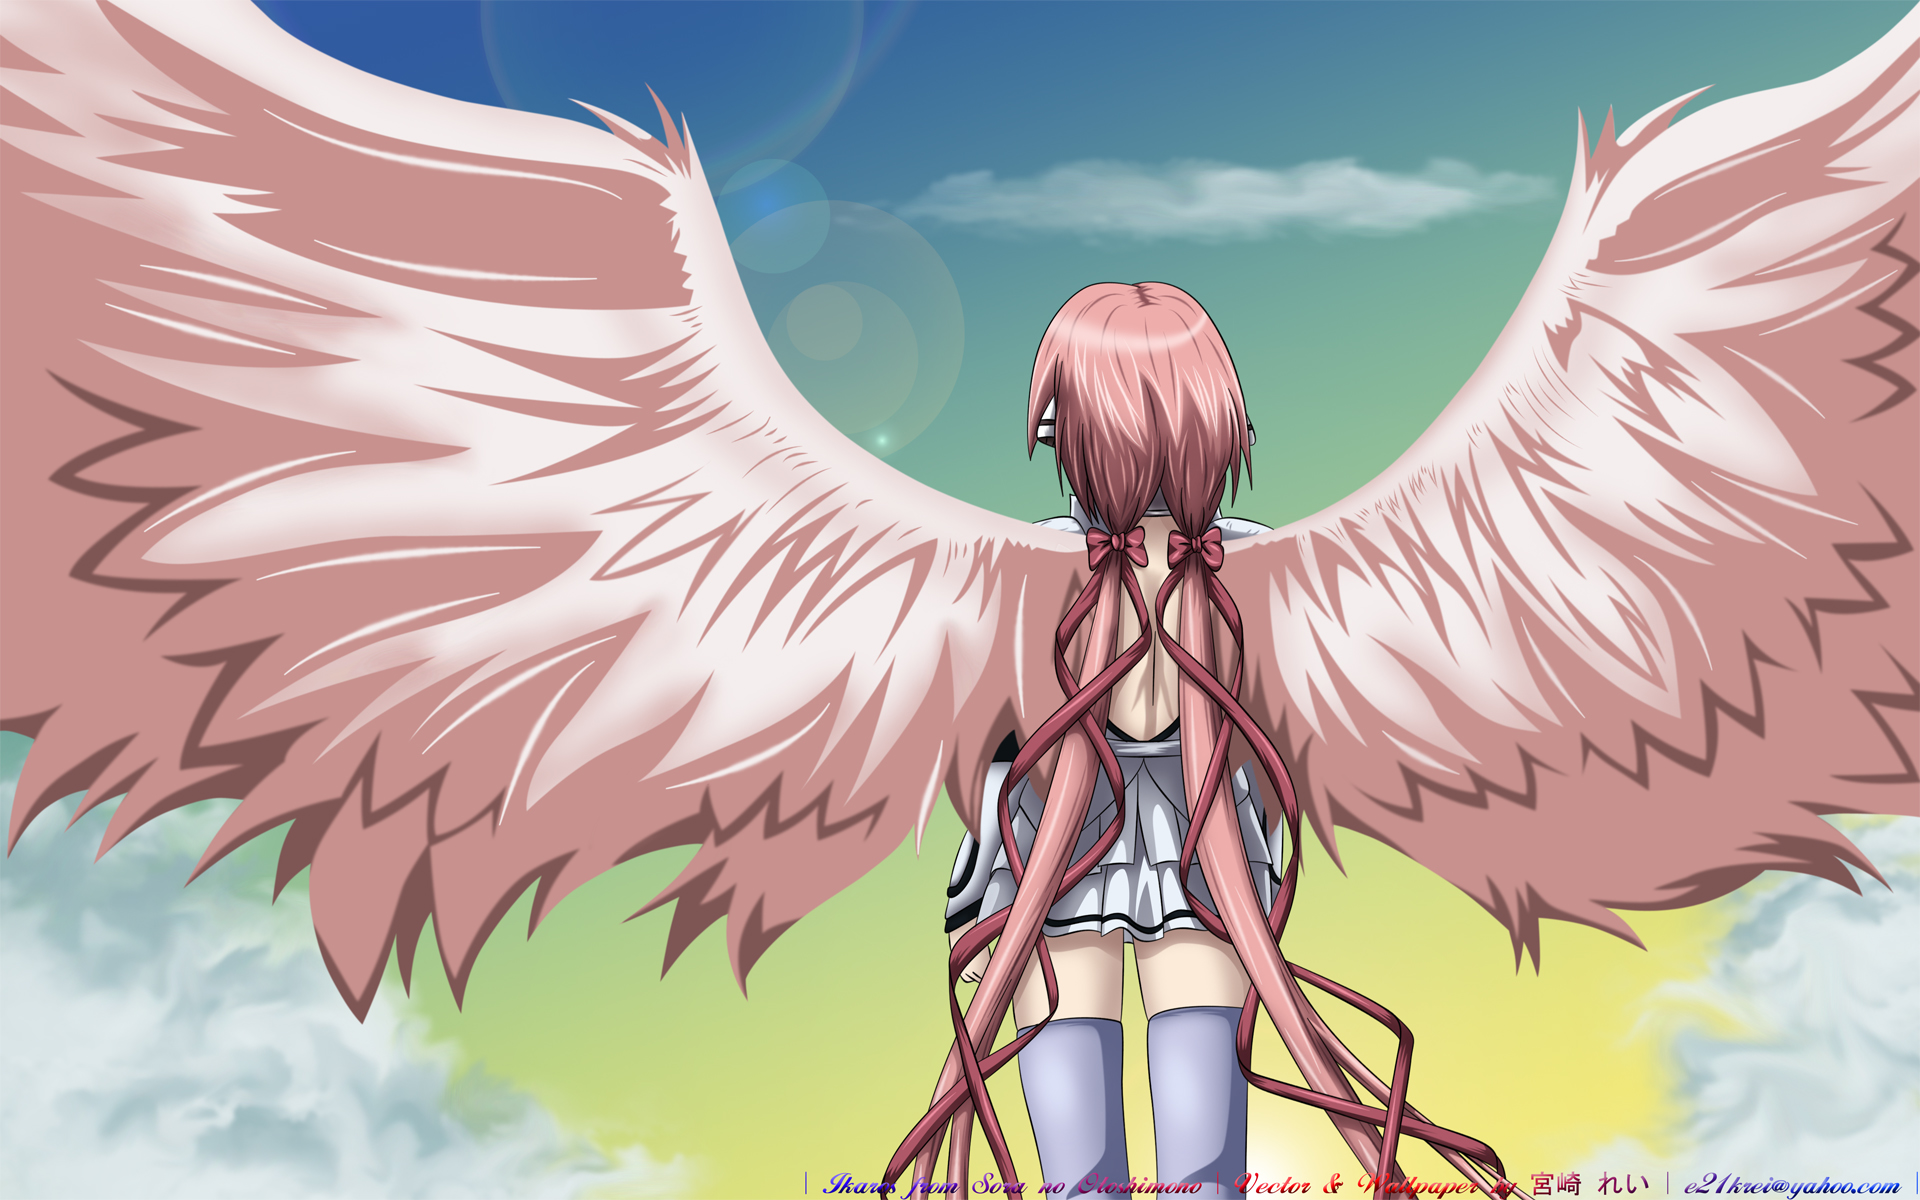 Ikaros from Heaven's Lost Property anime series.